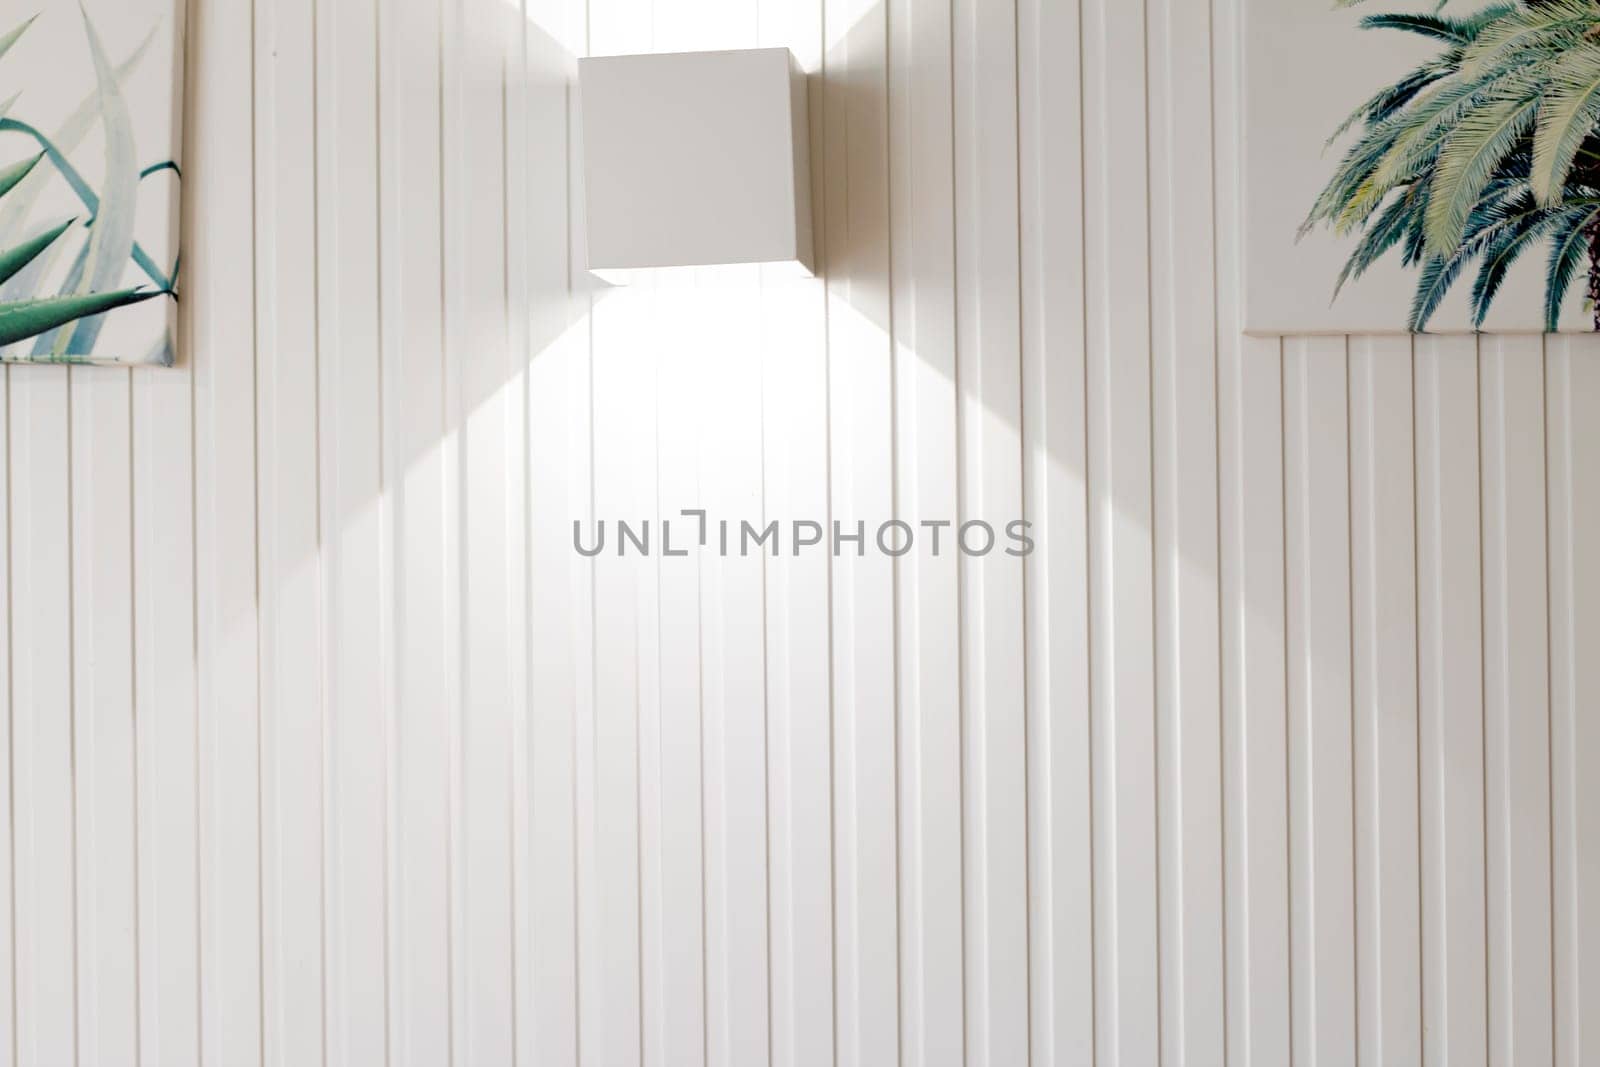 Wall Lights In The Room by urzine